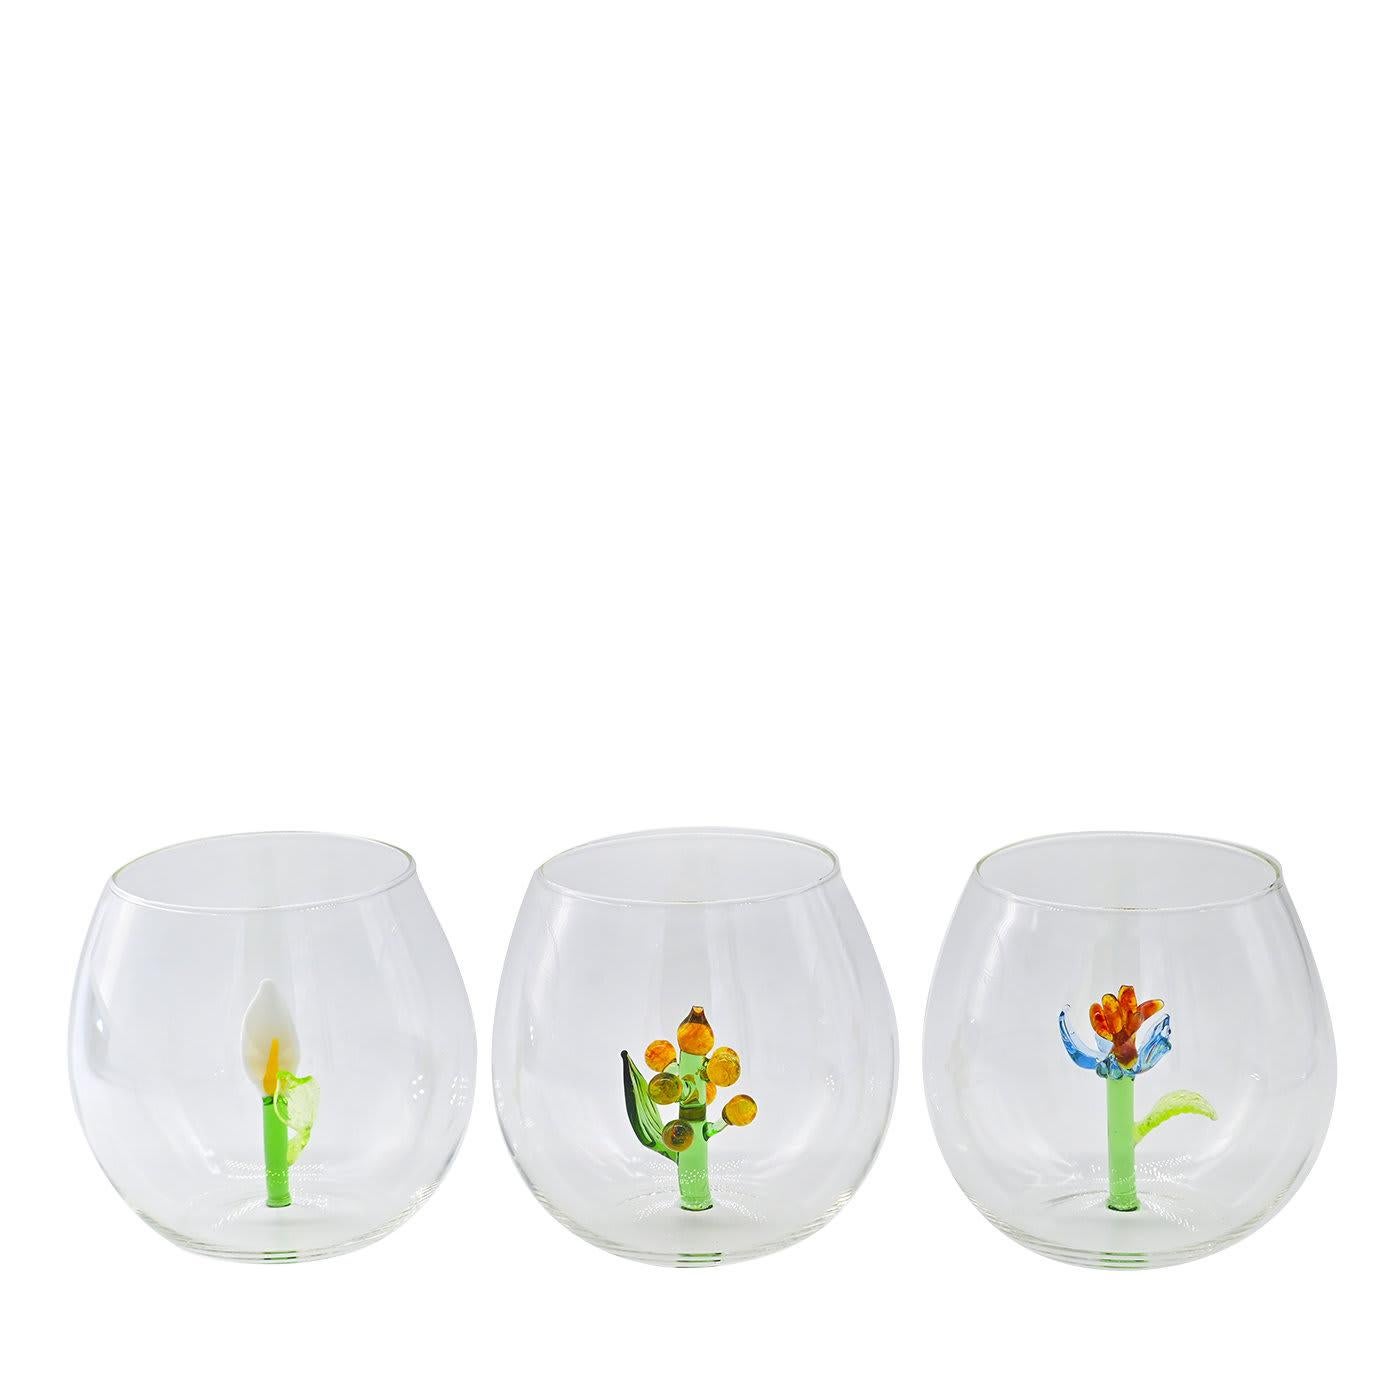 Two expert Venetian artisans are required to create each handcrafted piece in this set of highly original glasses. Each item features a unique flowering cactus sprouting from its inner base, creating a strikingly whimsical style. These romantic,